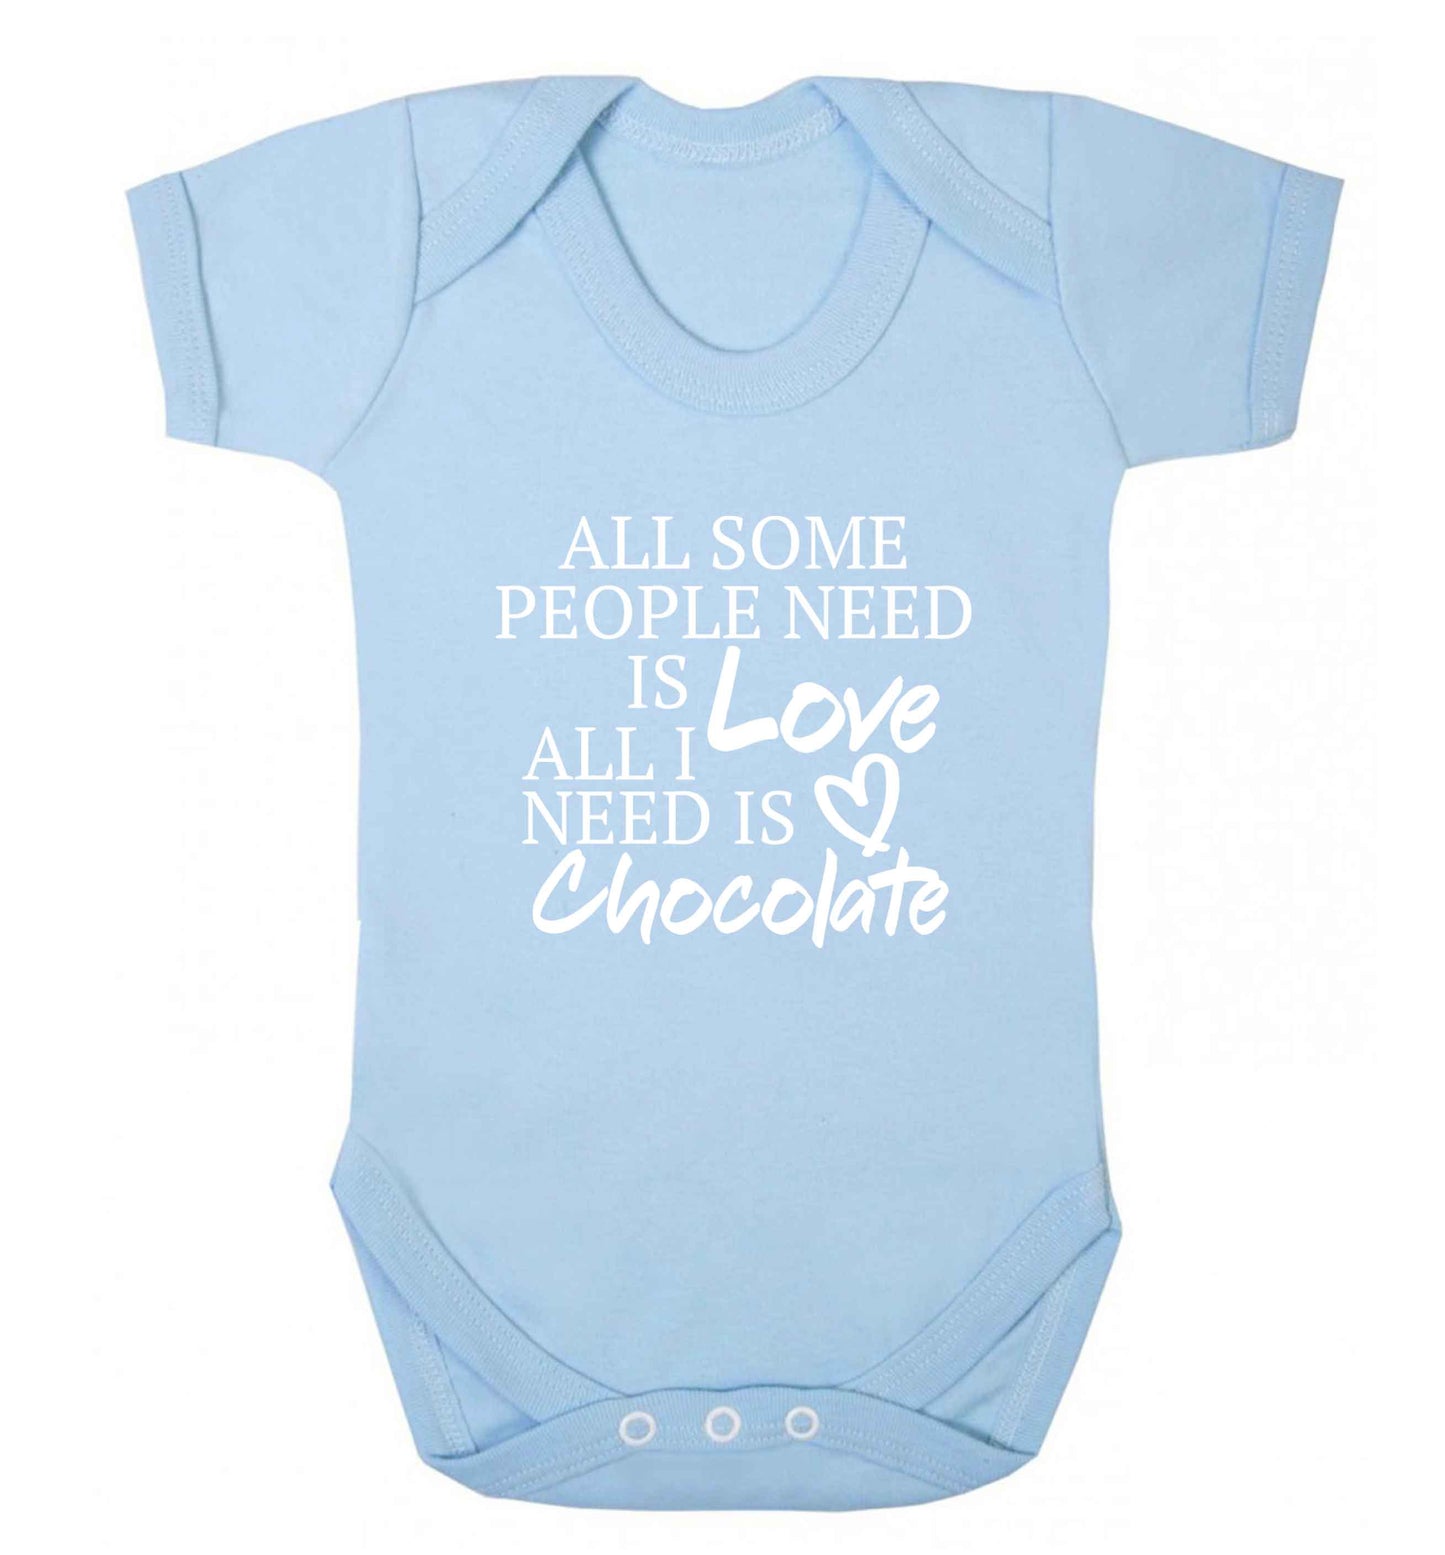 All some people need is love all I need is chocolate baby vest pale blue 18-24 months